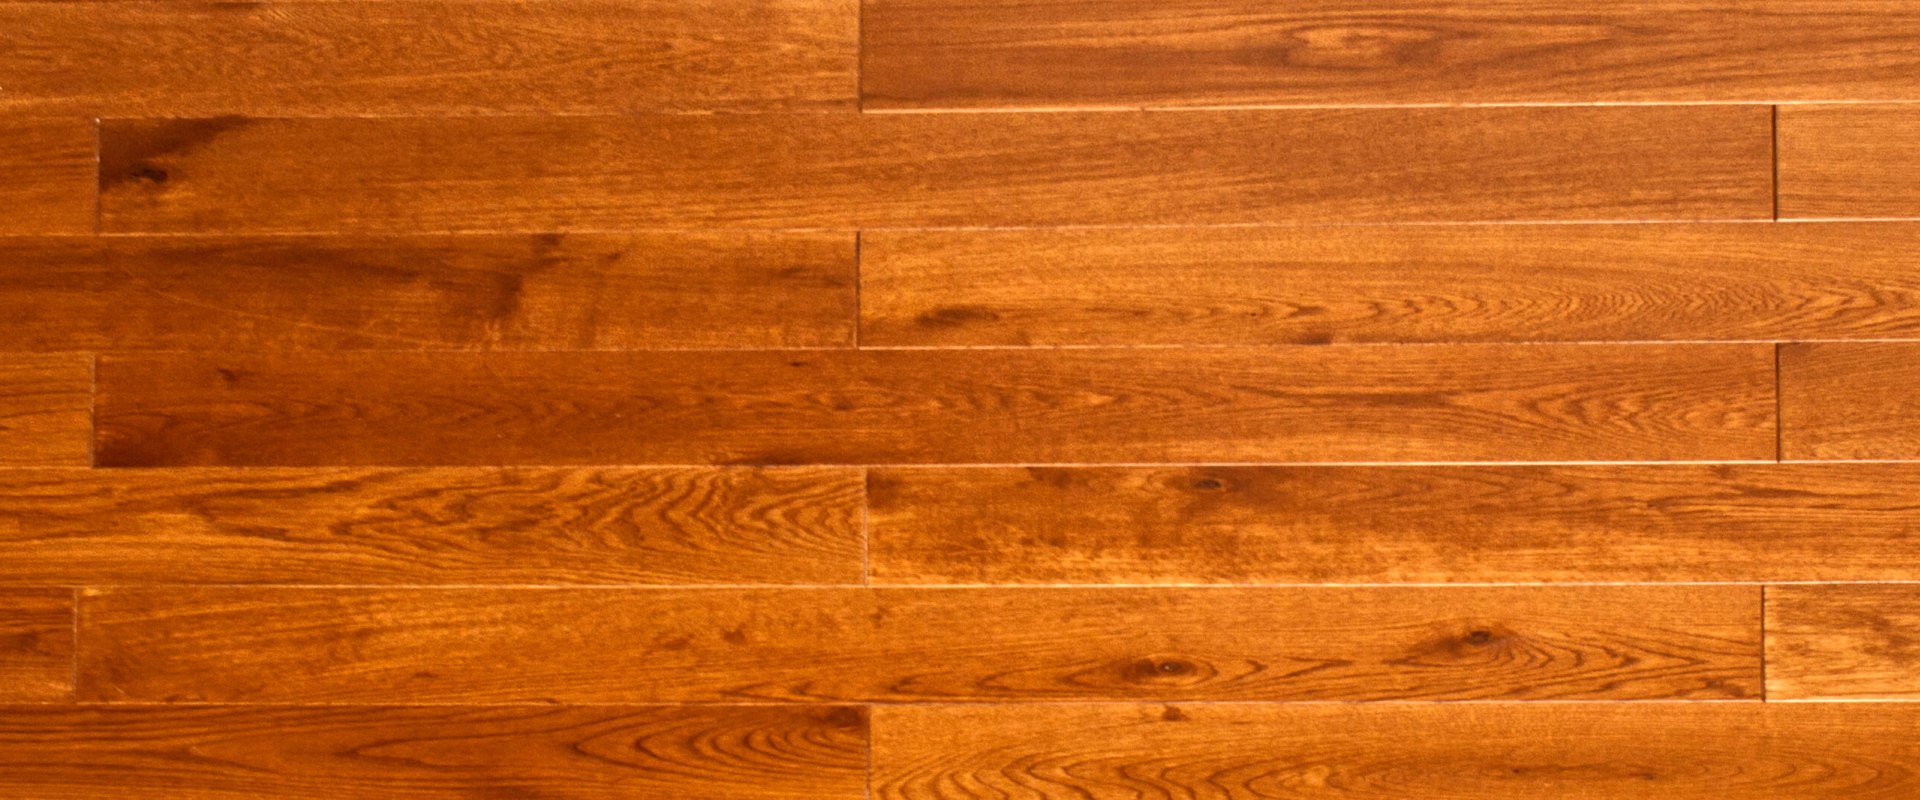 Can Wooden Flooring Be Refreshed If It Becomes Damaged or Worn Over Time?